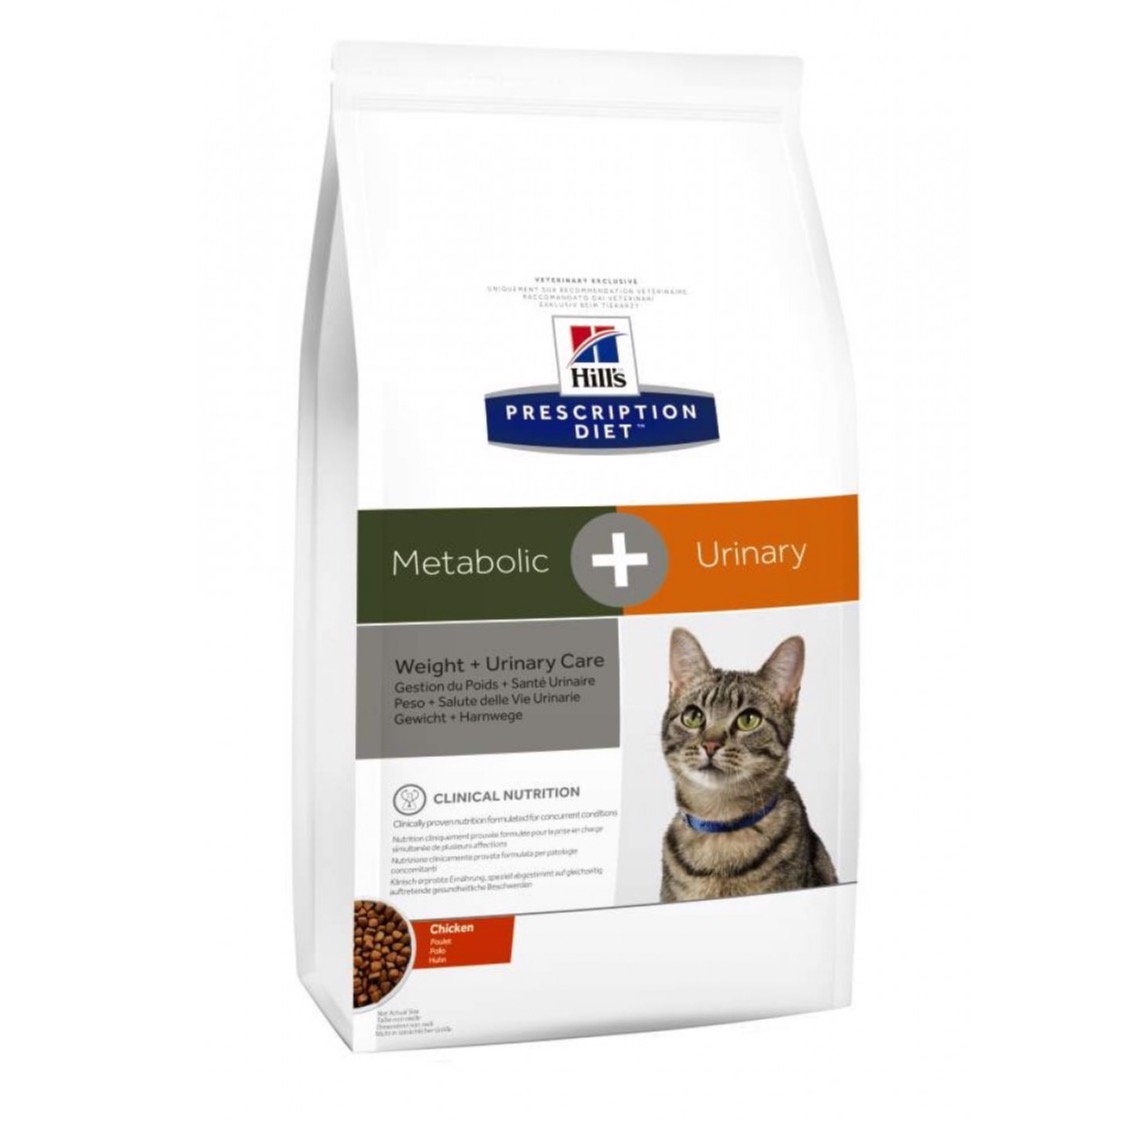 HILL S METABOLIC URINARY 1.5KG